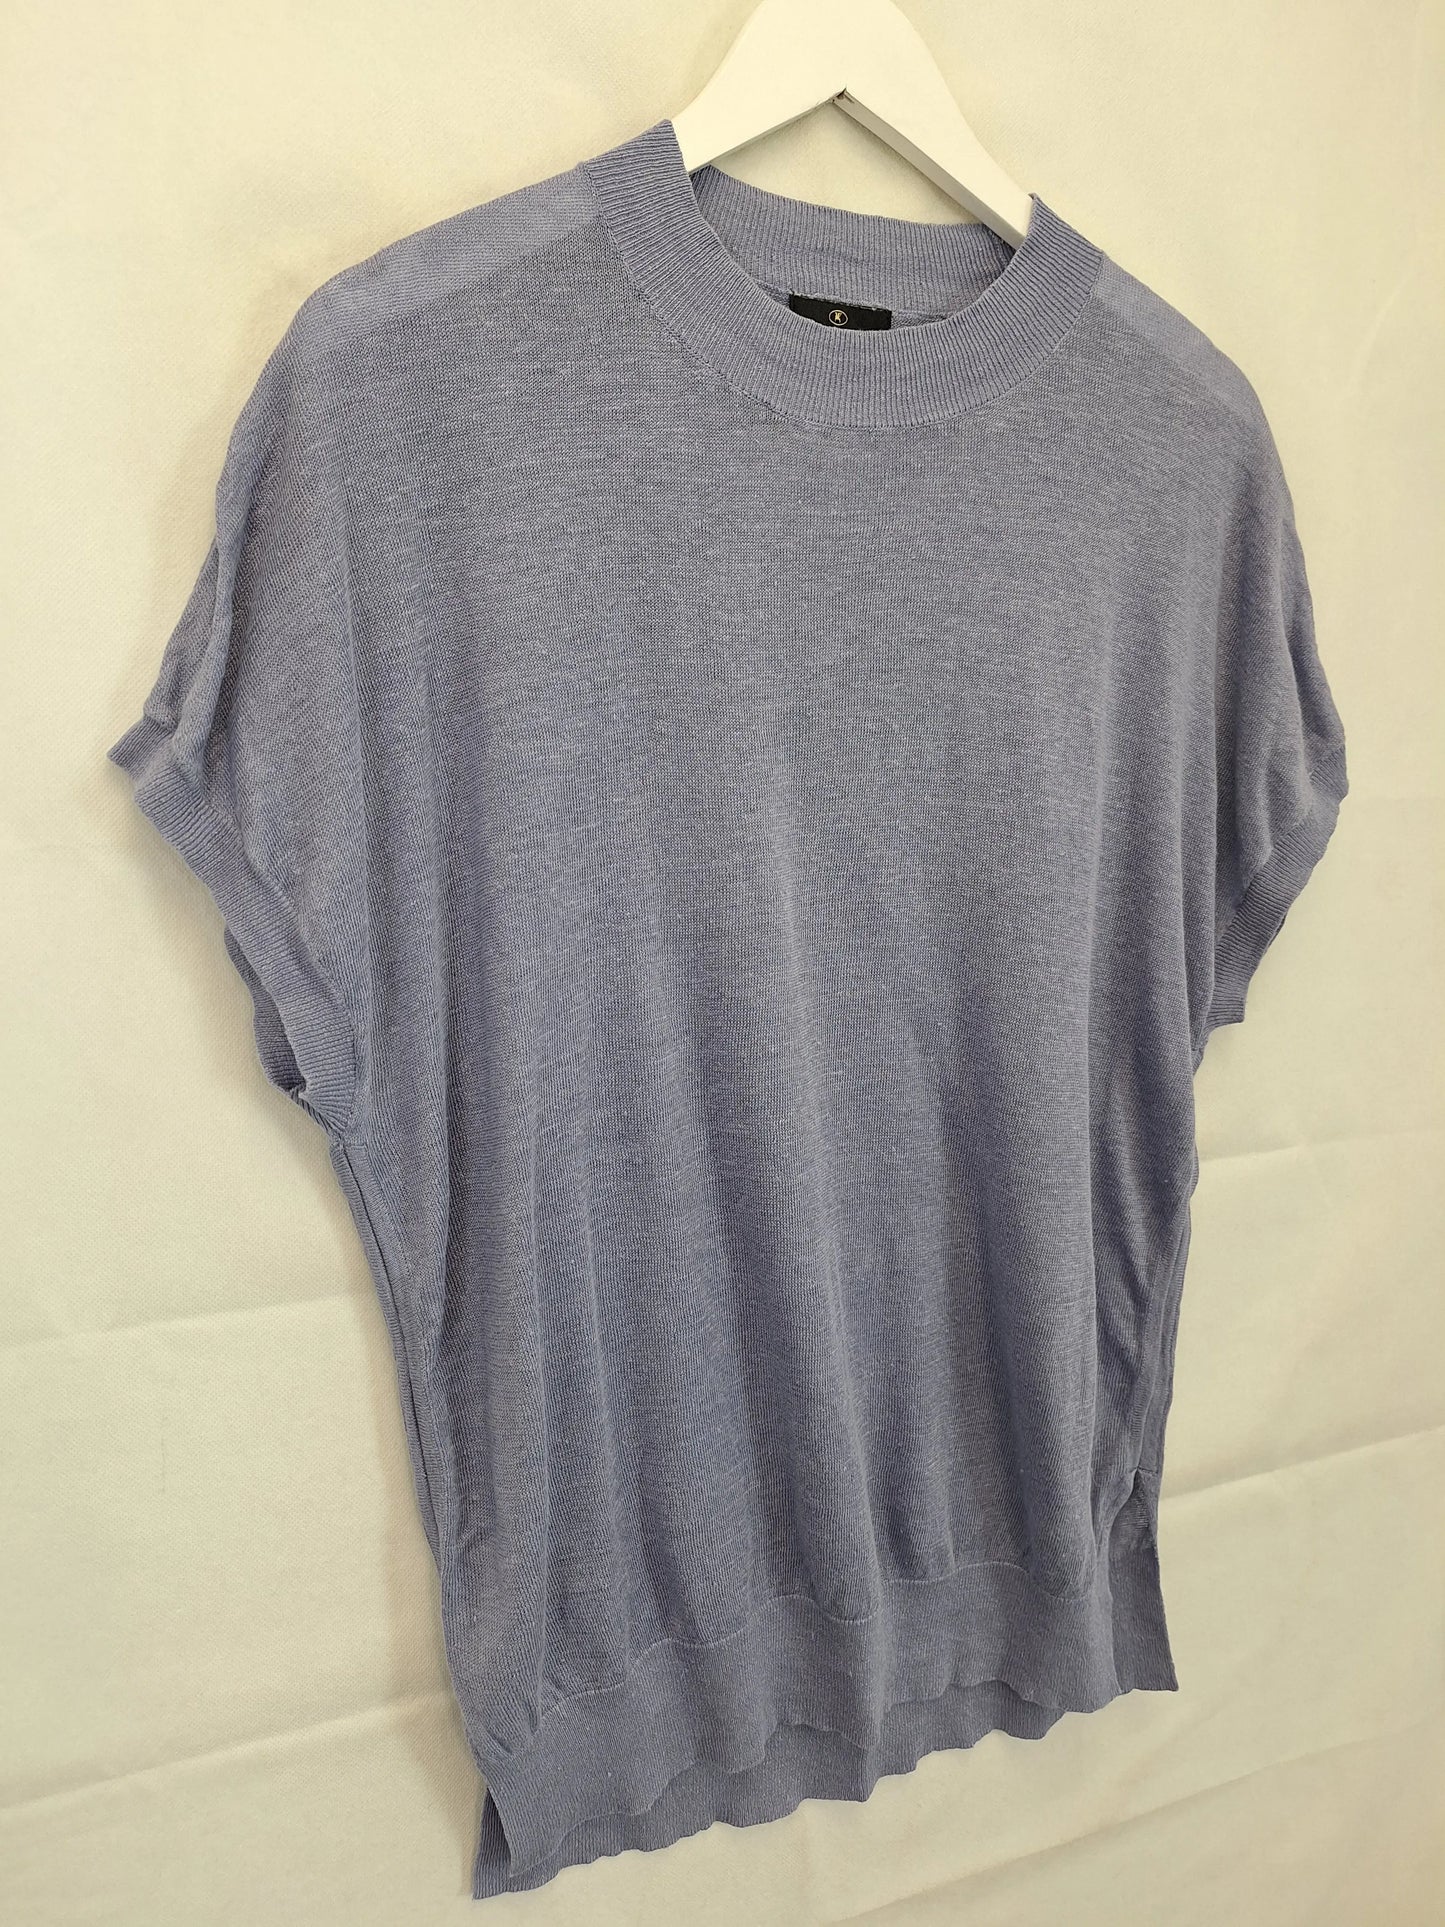 Trent Nathan Crew Neck Knitted Lavender Top Size 10 by SwapUp-Online Second Hand Store-Online Thrift Store